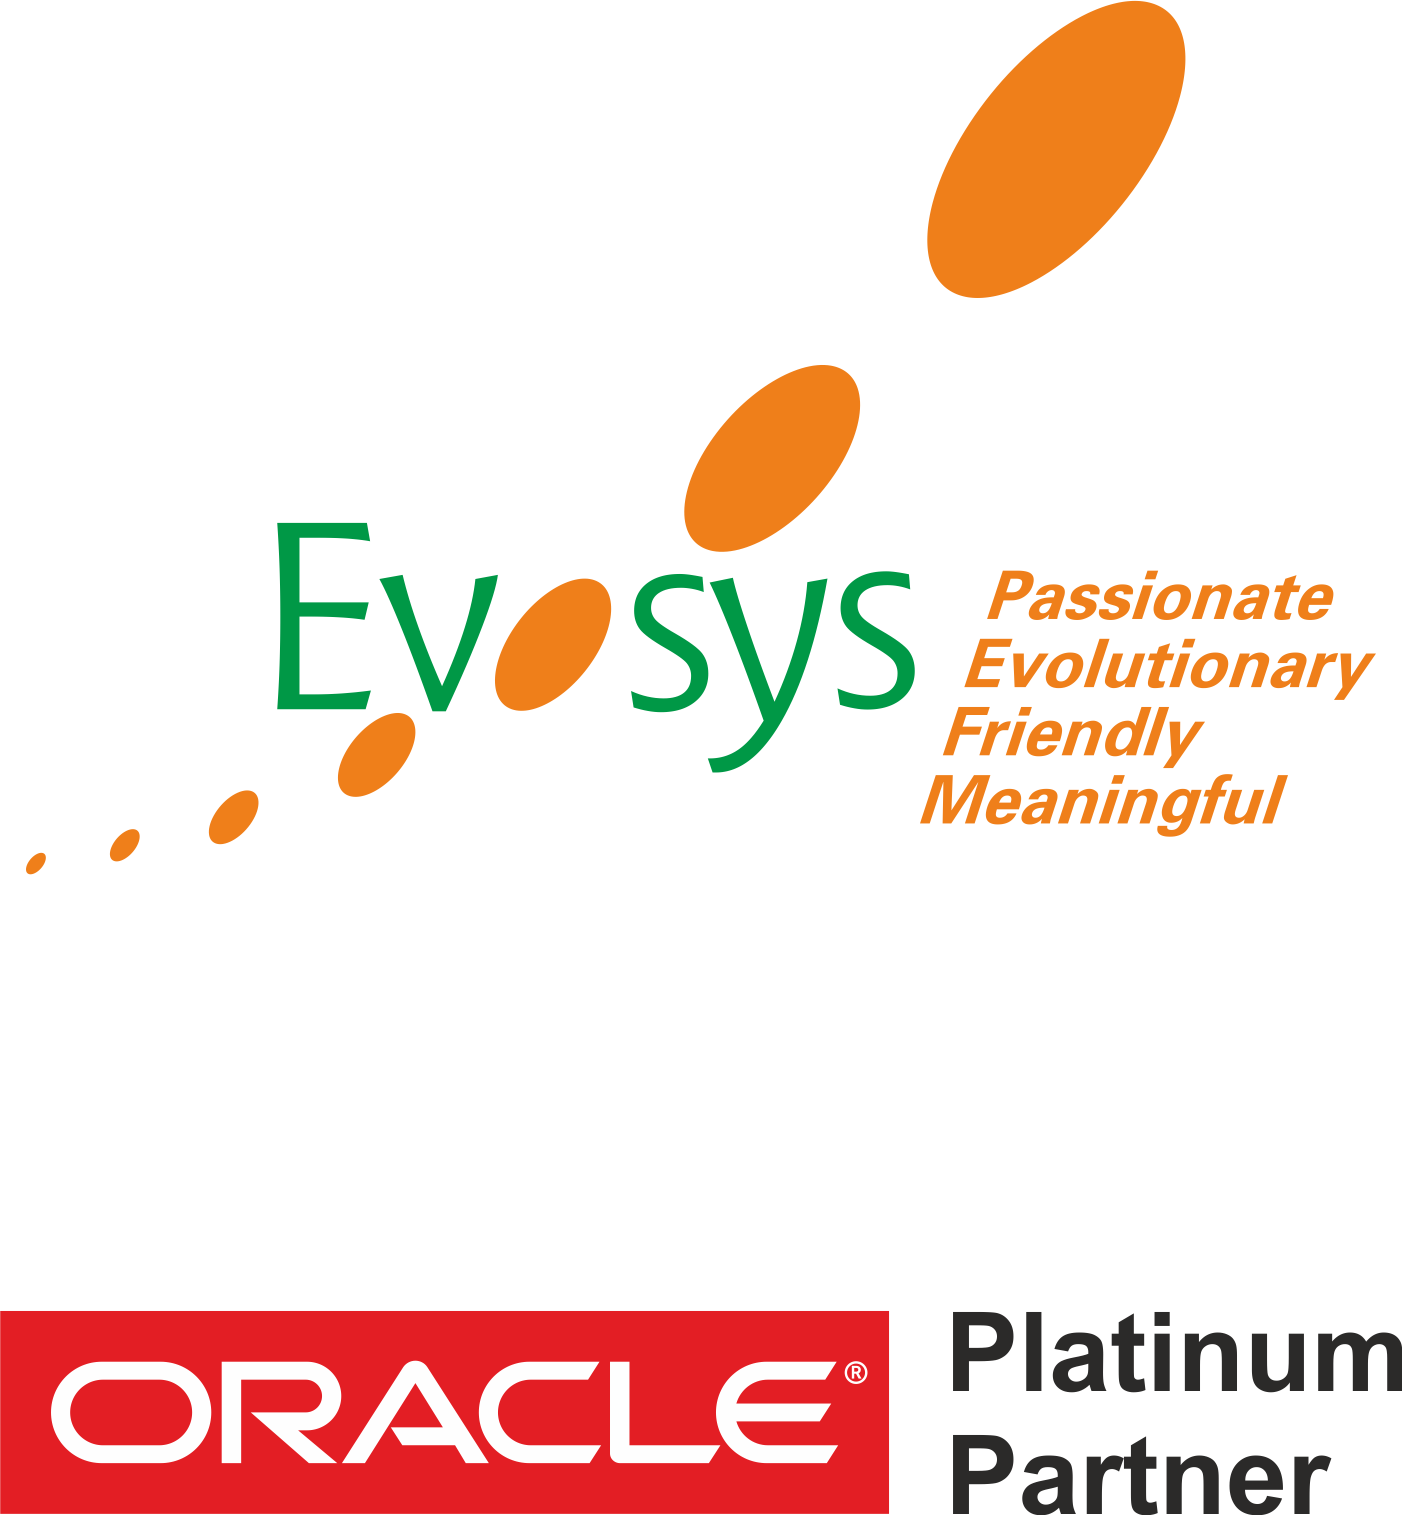 evosys-enters-the-north-america-market-as-an-expansion-of-the-company-s-global-operations-to